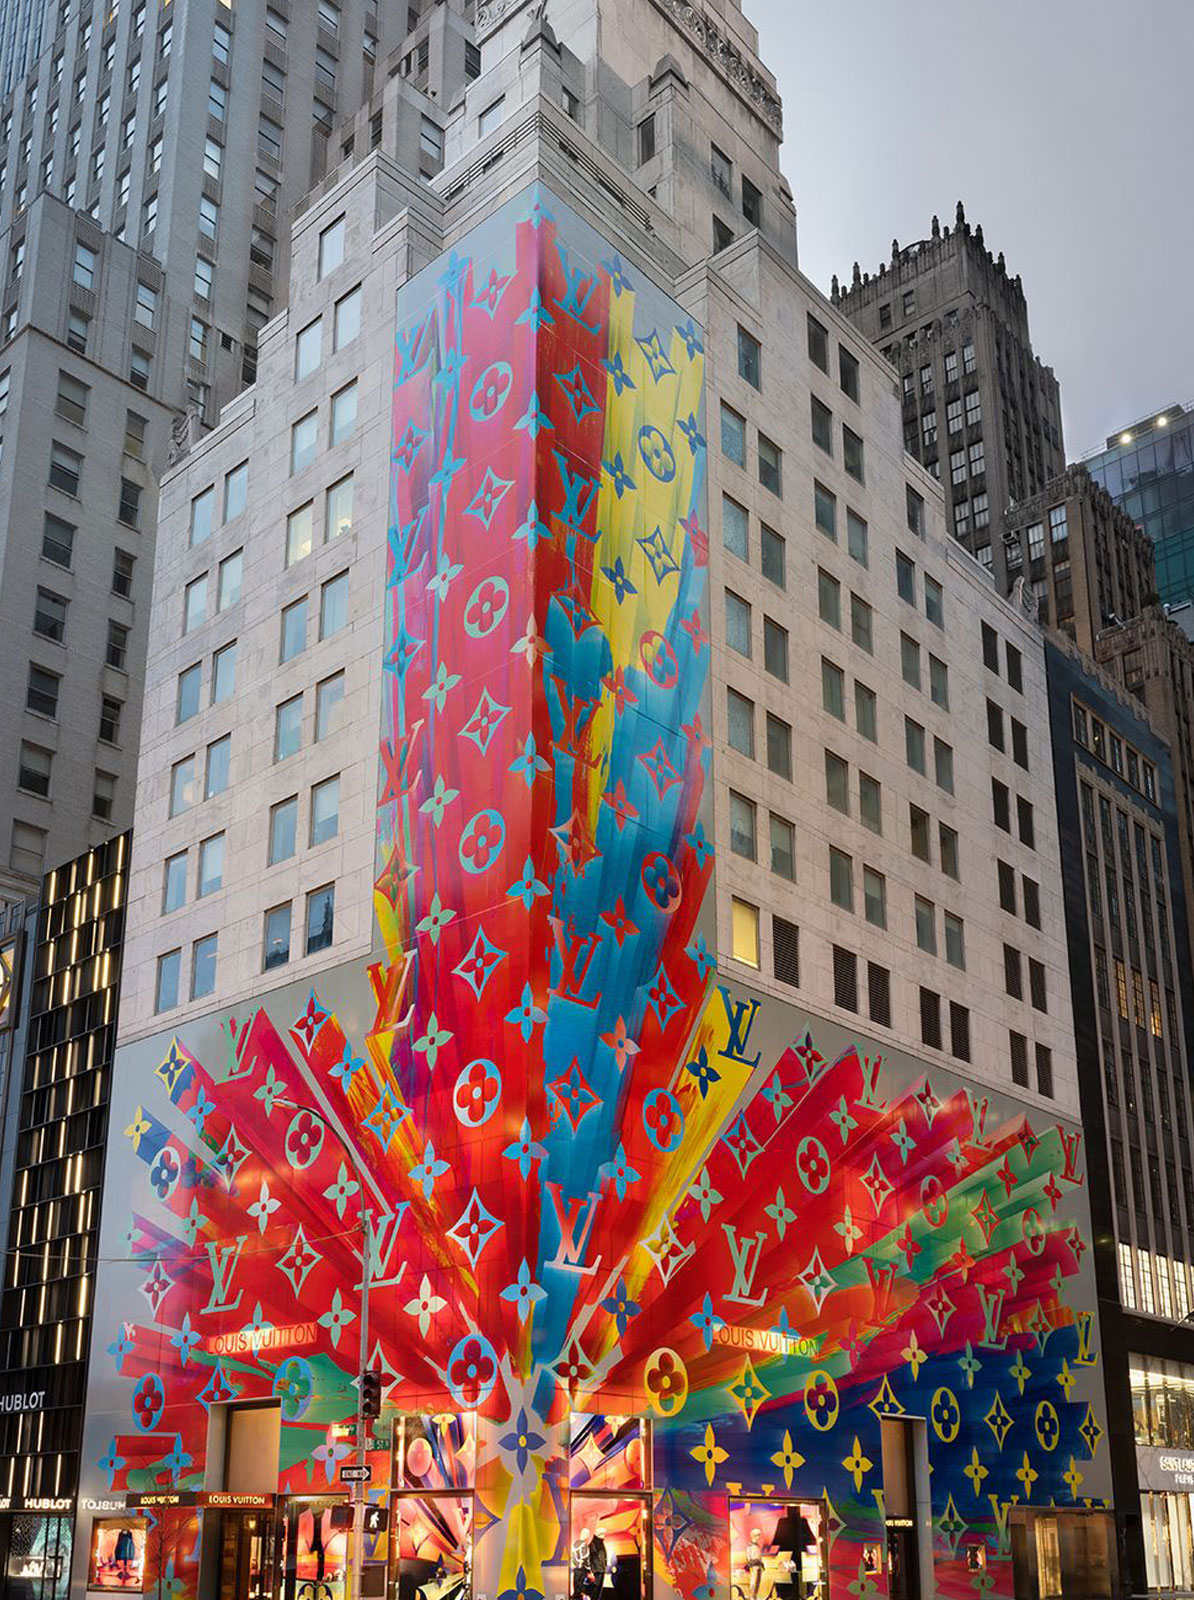 Louis Vuitton New York 5th Avenue Store in New York, United States